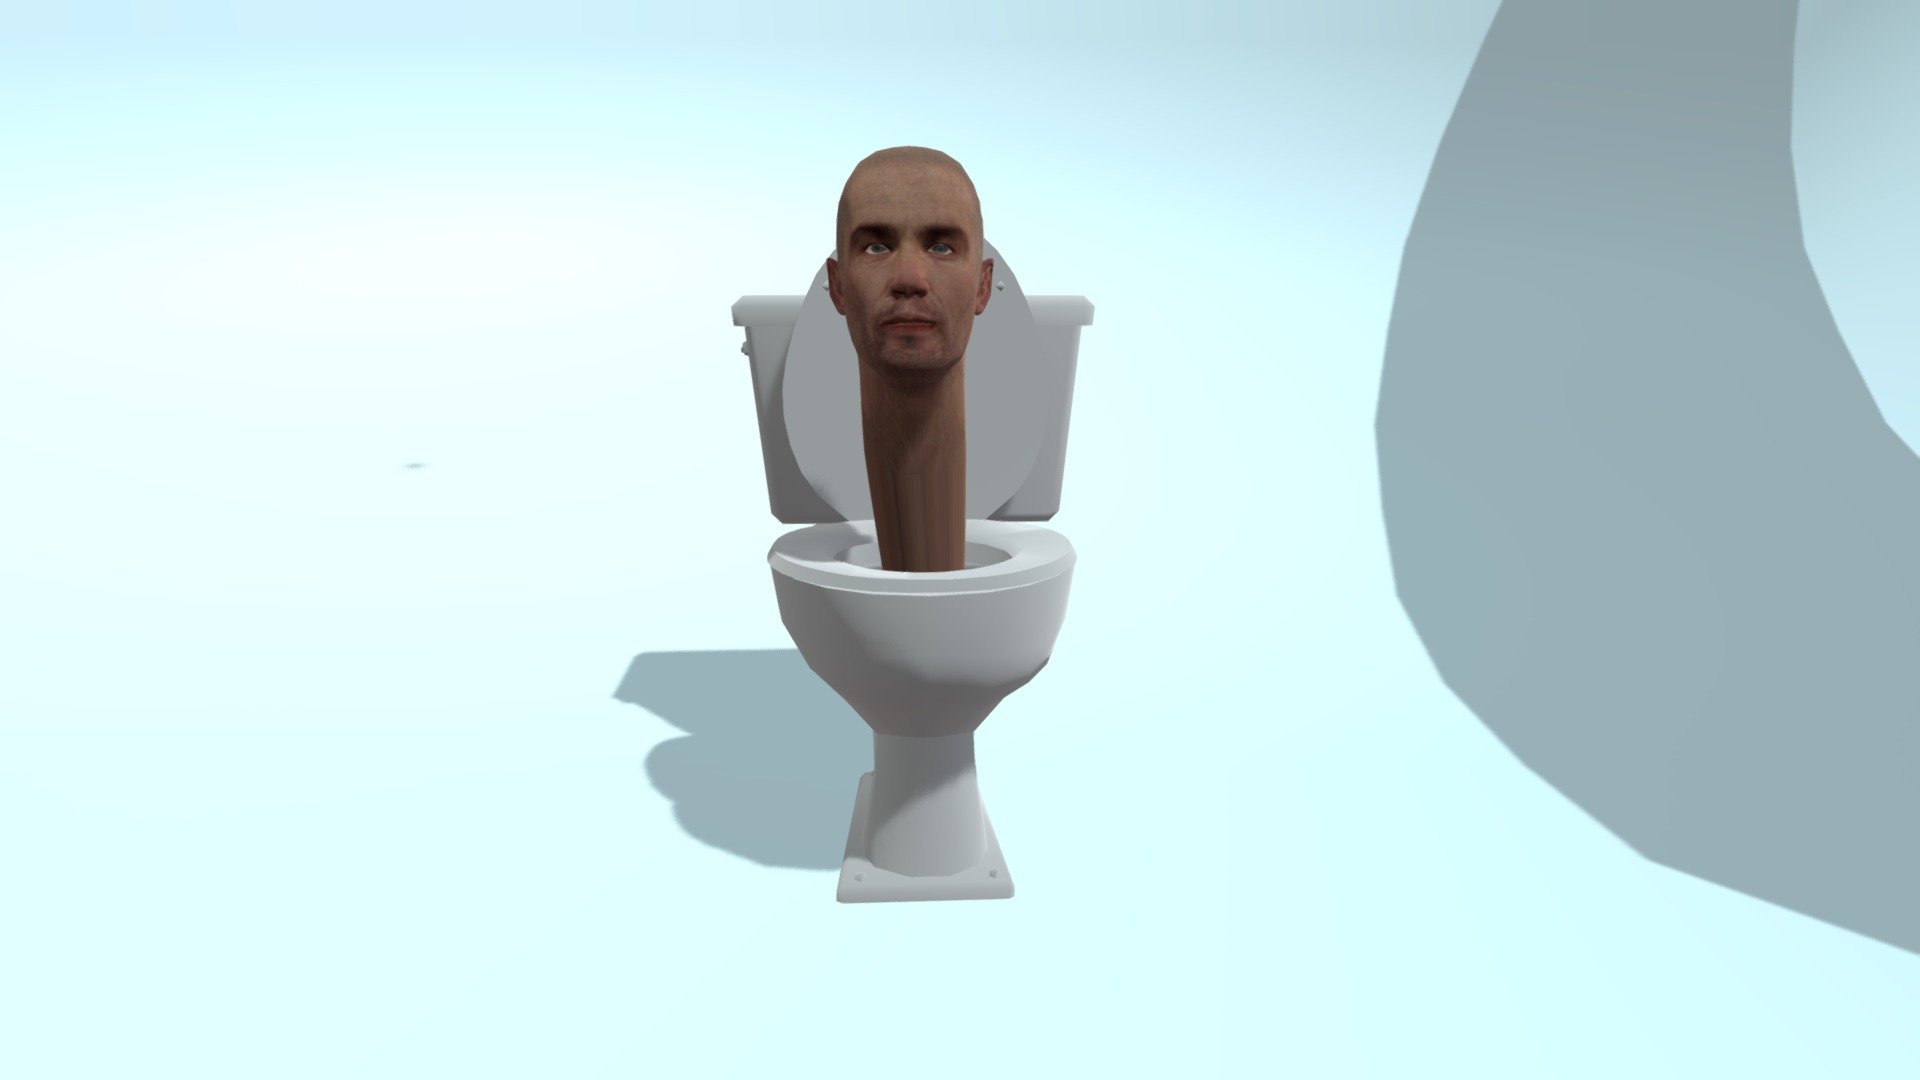 Toilet man from skibidi toilet meme from youtube .
The model is rigged and ready to use ,also it has facial animation too :), follow to keep updated with the rest of skibidi toilet characters .
Go to cgtrades and you will find the model for the cheepest price.
Be creative with it and enjoy . 3d model